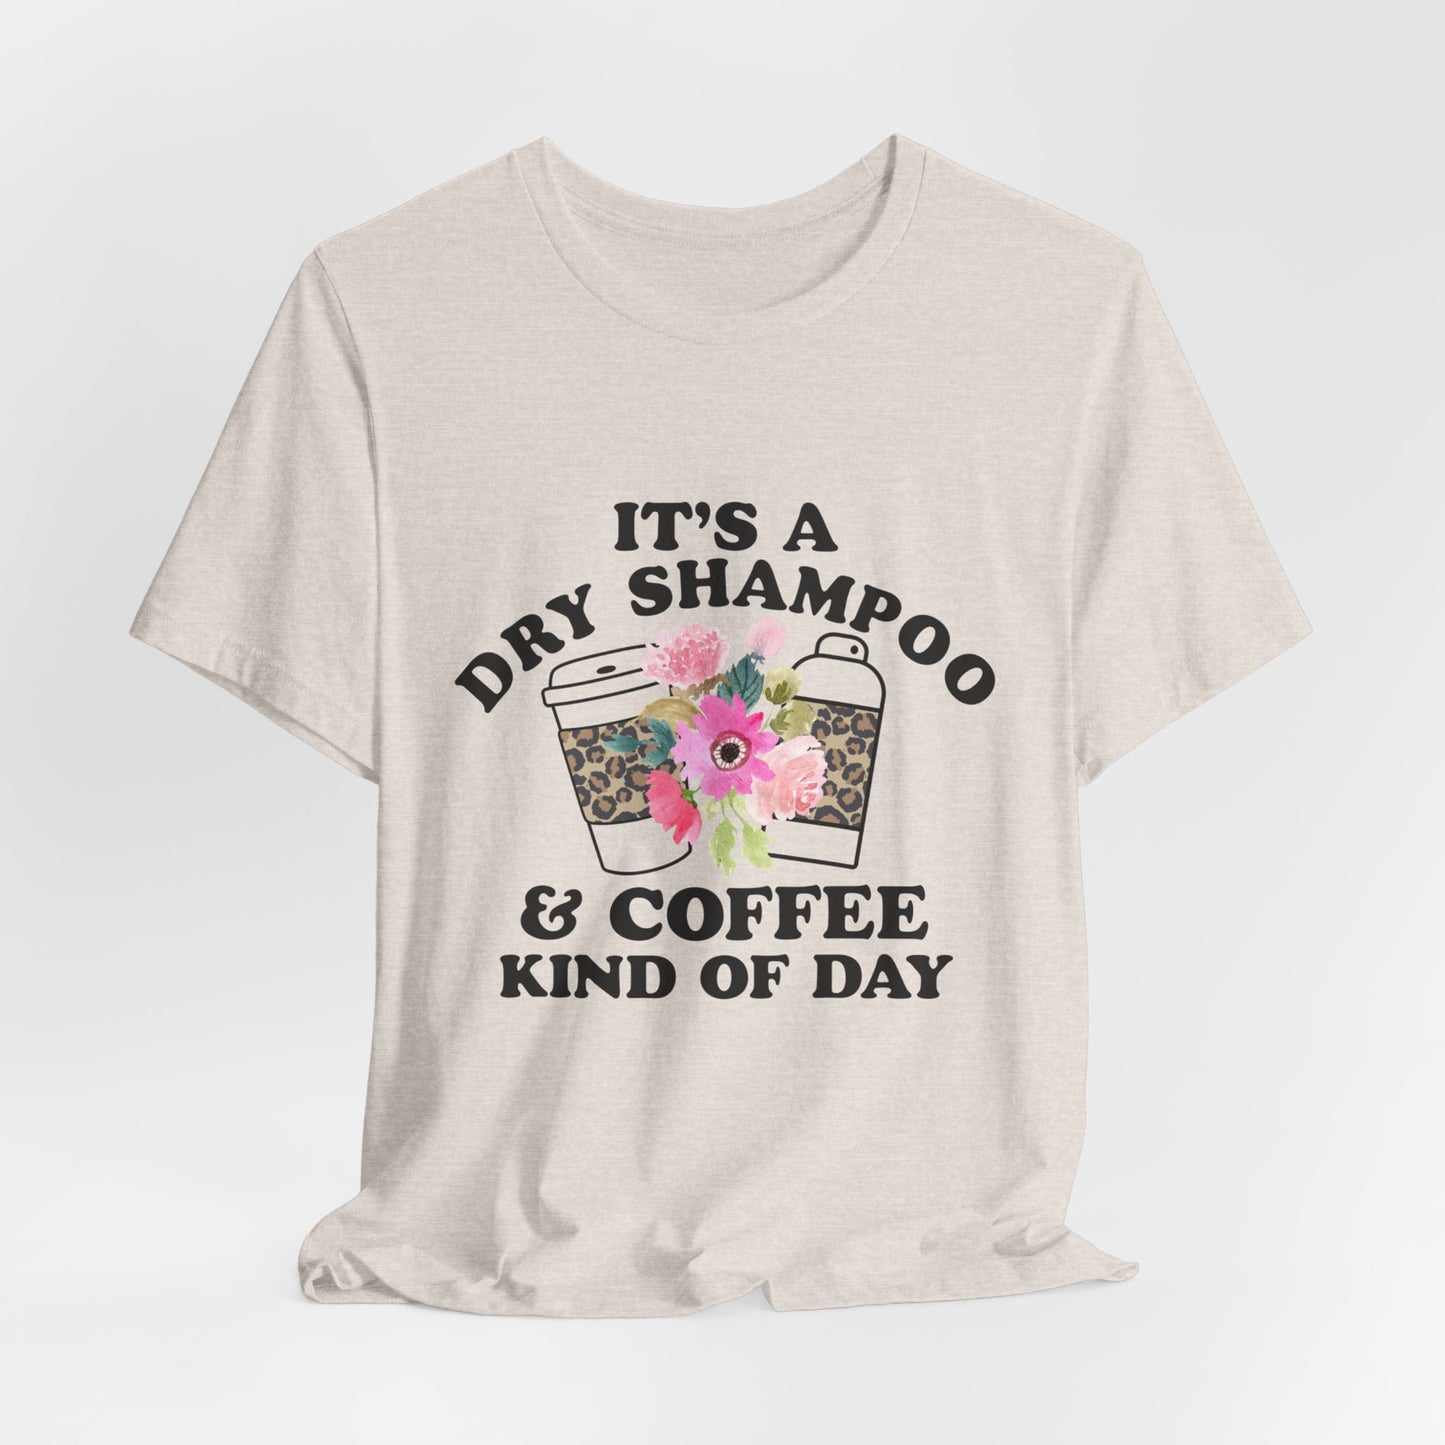 Dry Shampoo and Coffee Kind Of Day Women's Funny Short Sleeve Tshirt